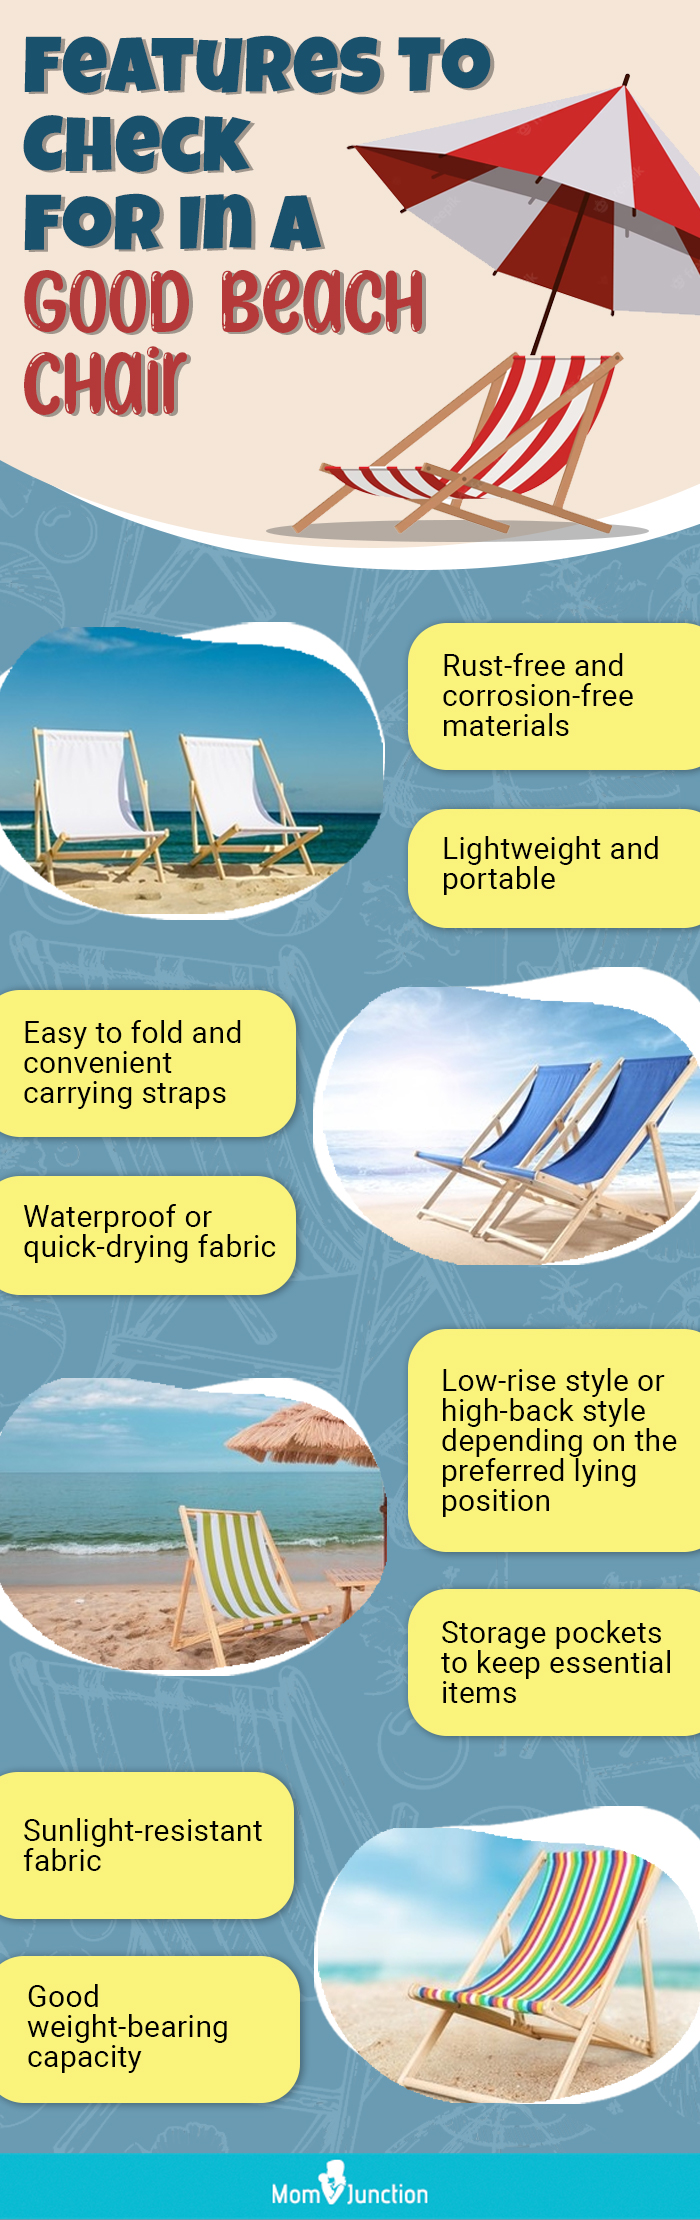 Features To Check For In A Good Beach Chair (infographic)